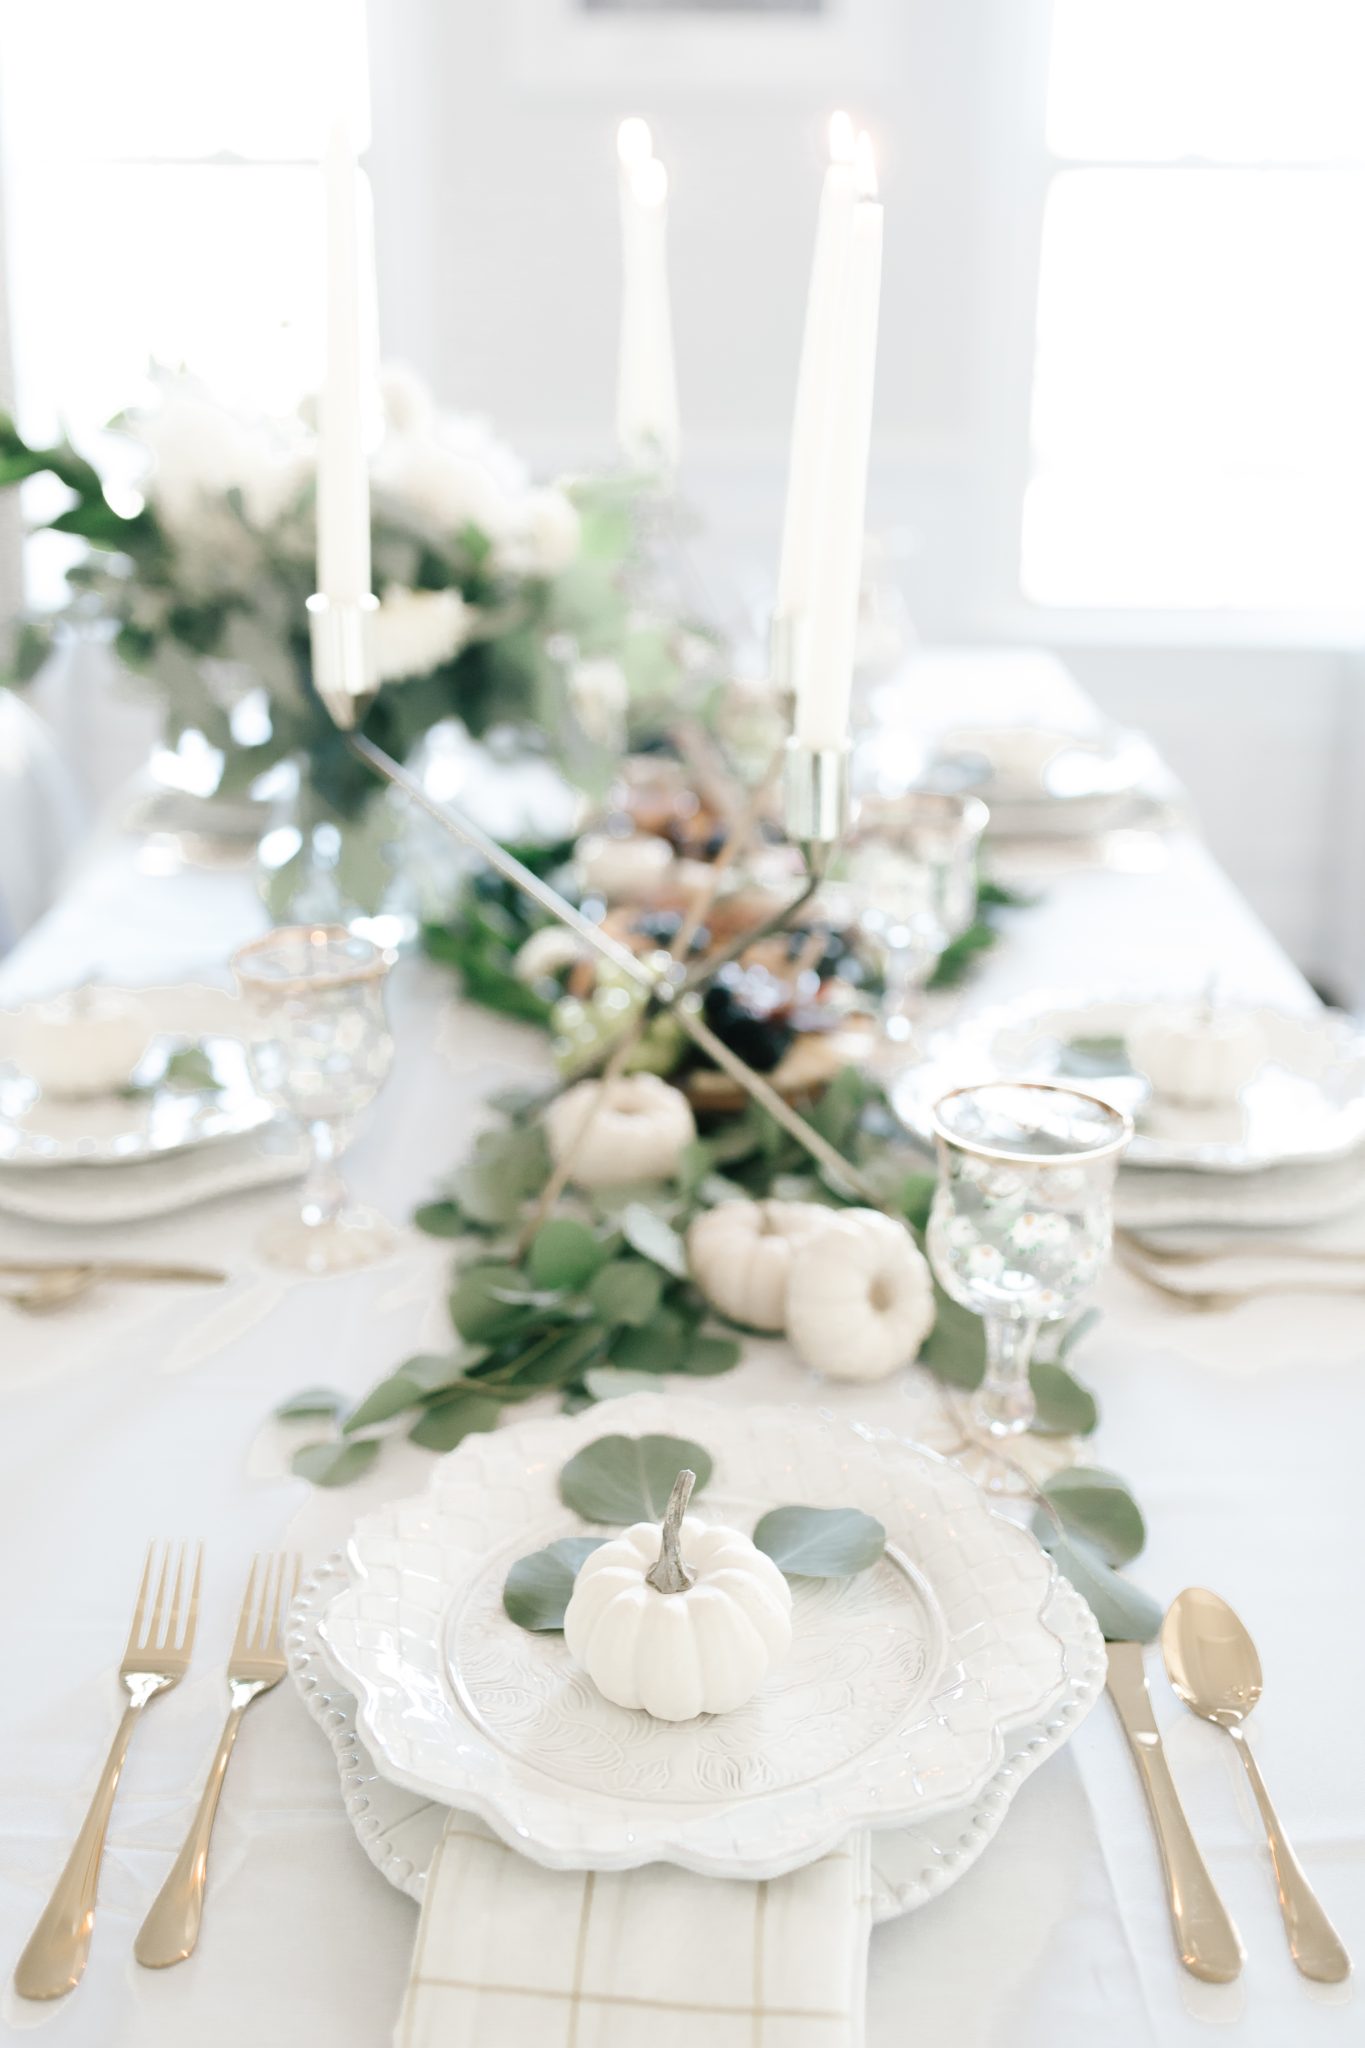 A Neutral Thanksgiving Tablescape With Mackenzie-Childs - Beaus and Ashley